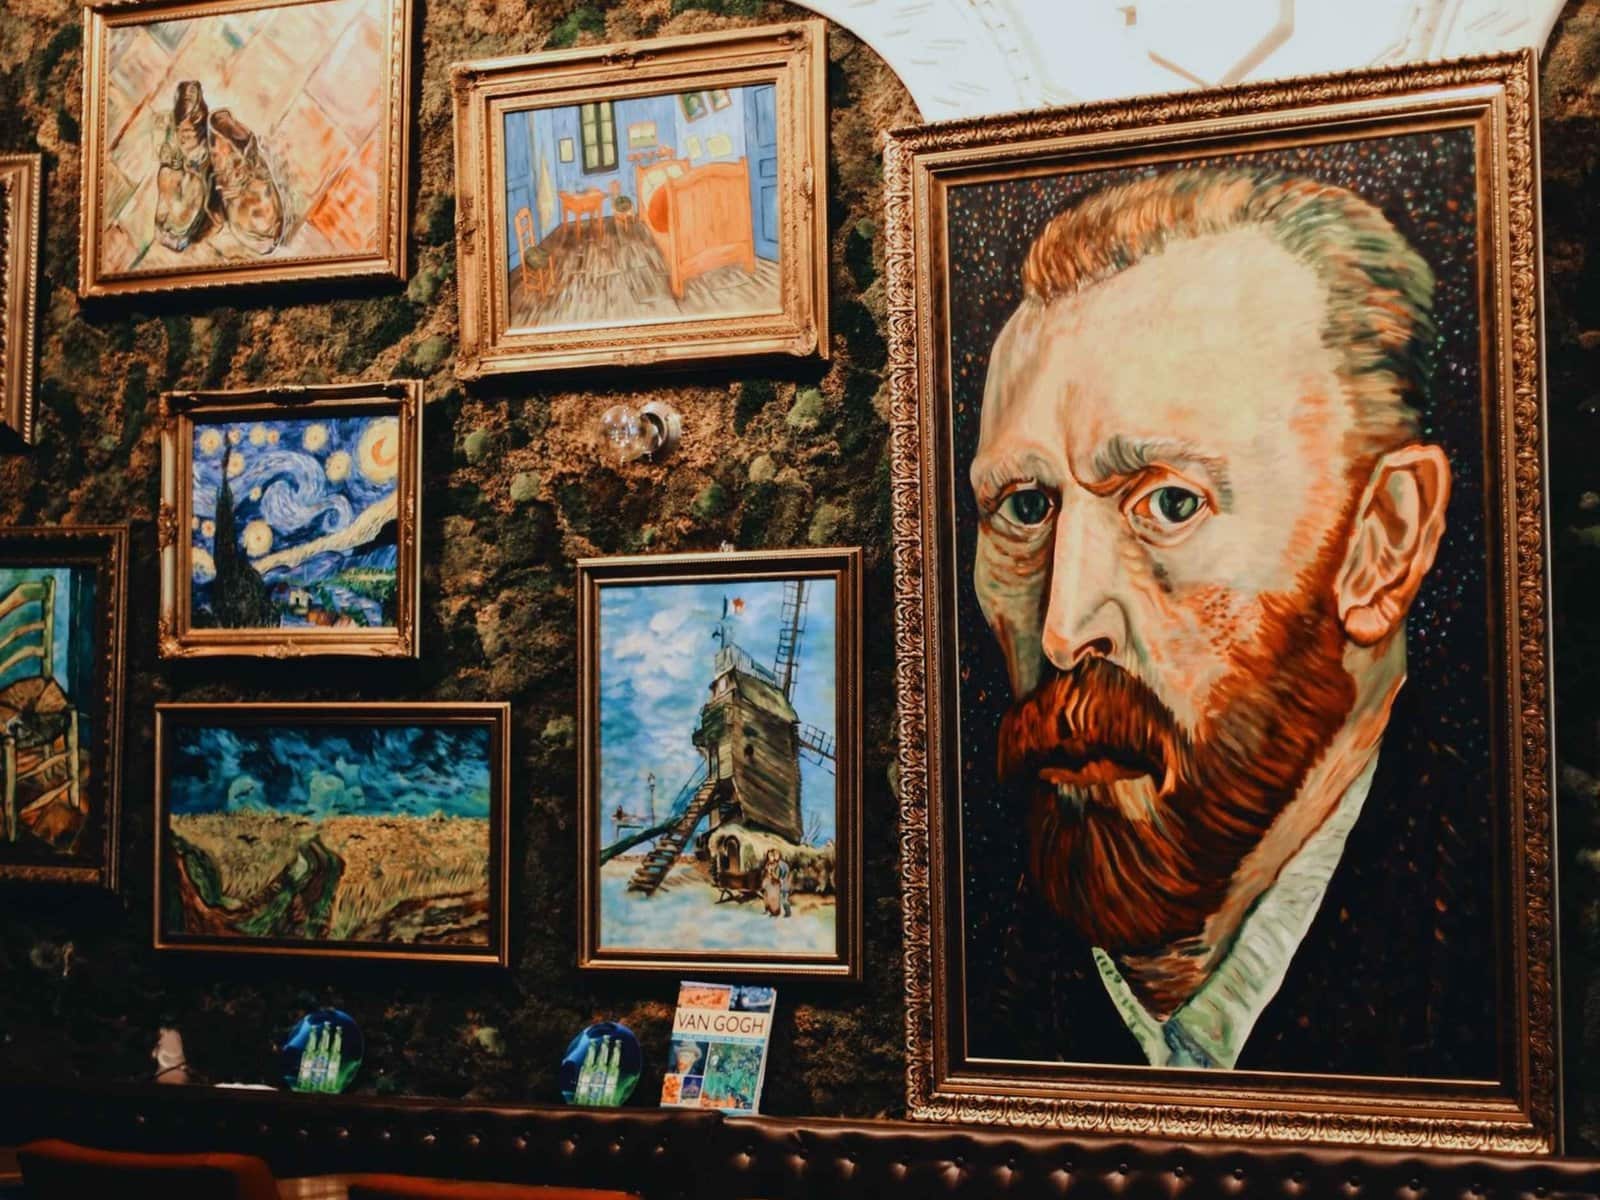 Van gogh's paintings on the wall of a restaurant.